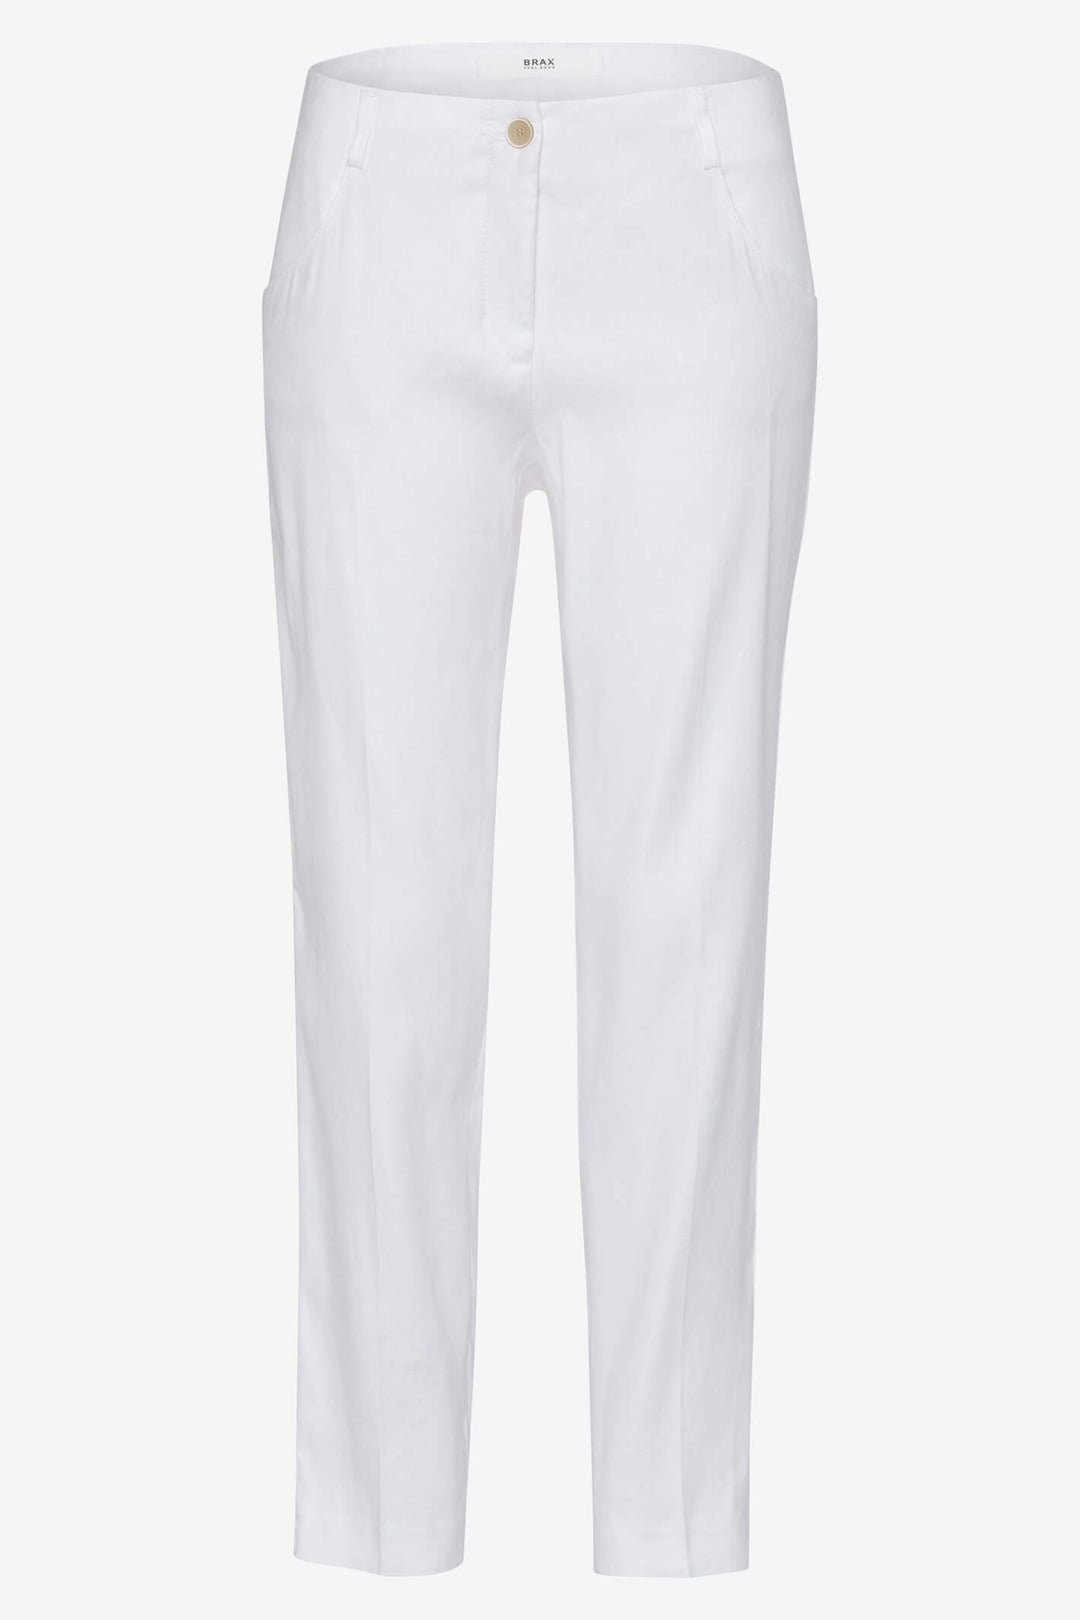 Brax 72-2258 98 Off-White Maron Flat Front 7-8 Length Trouser - Shirley Allum Boutique